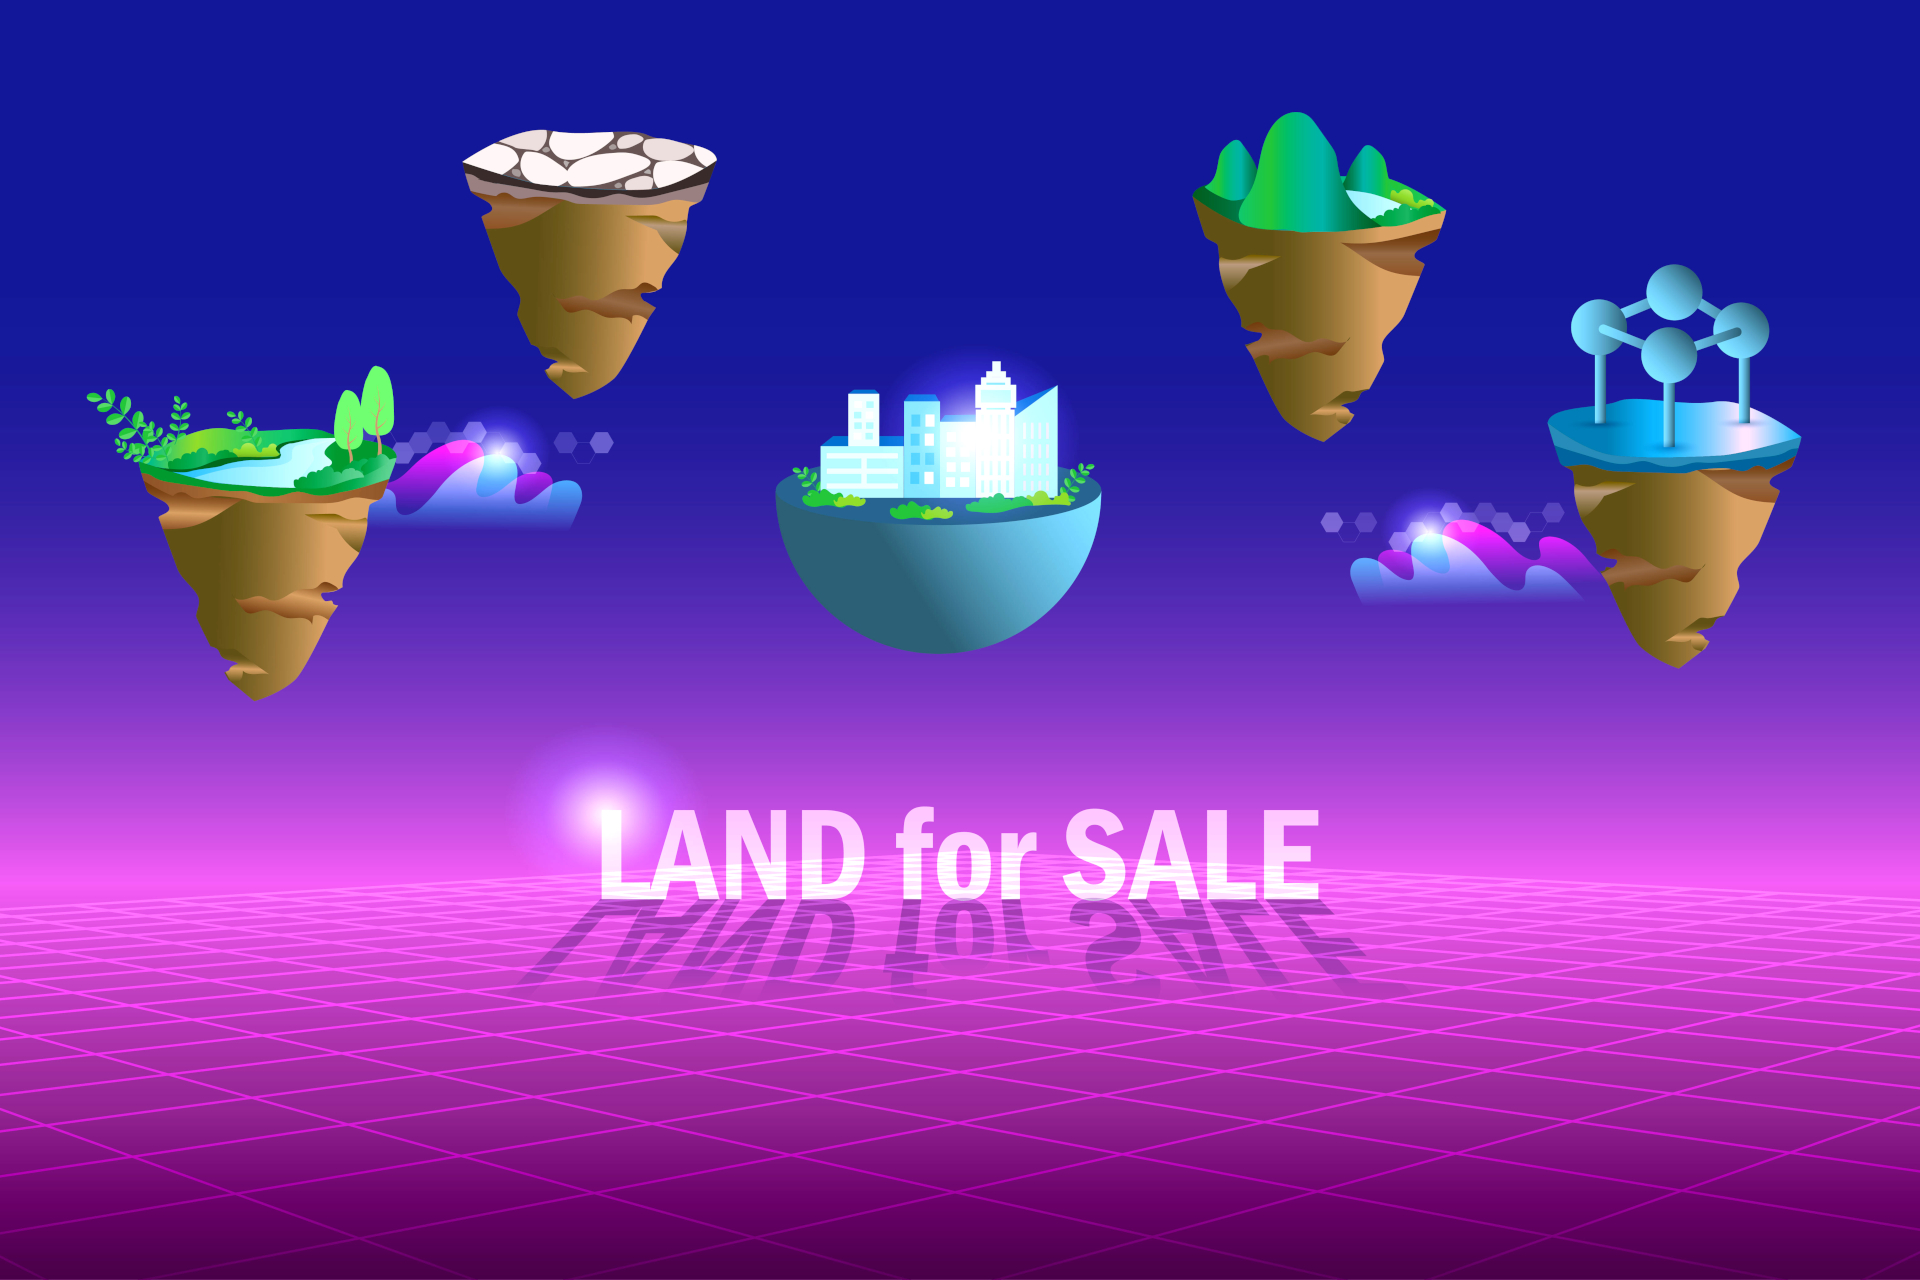 Metaverse land for sale, digital real estate and property investment technology. Virtual reality land for sale in metaverse cyber space futuristic environment background.